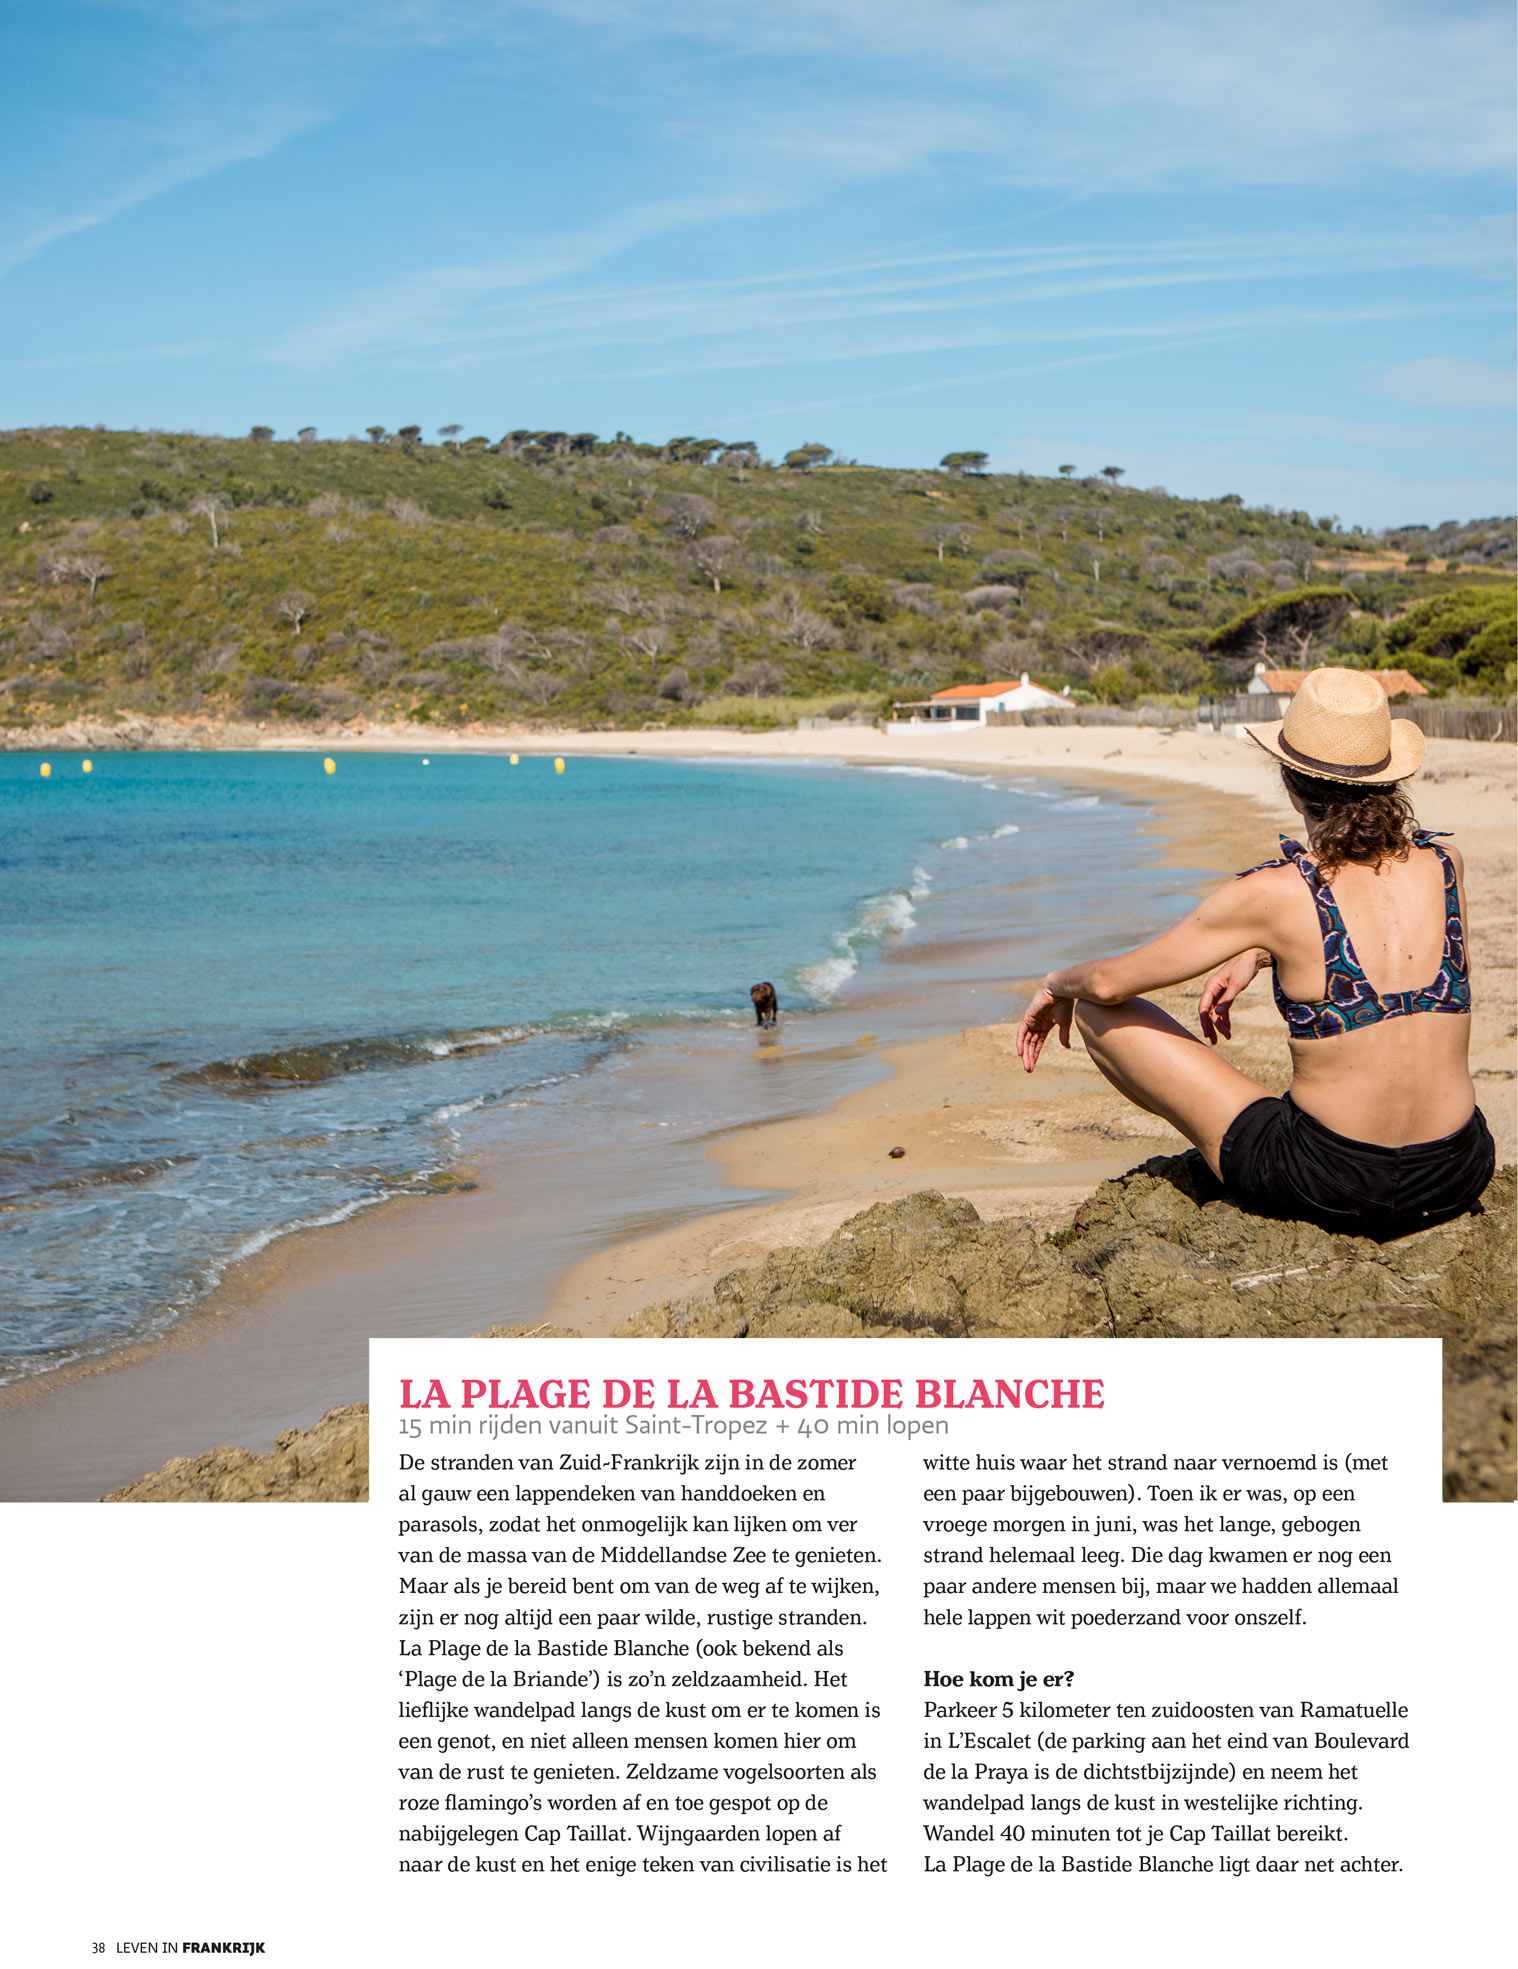 Single page magazine spread showing text and a photograph of a woman sitting on rocks above an empty beach